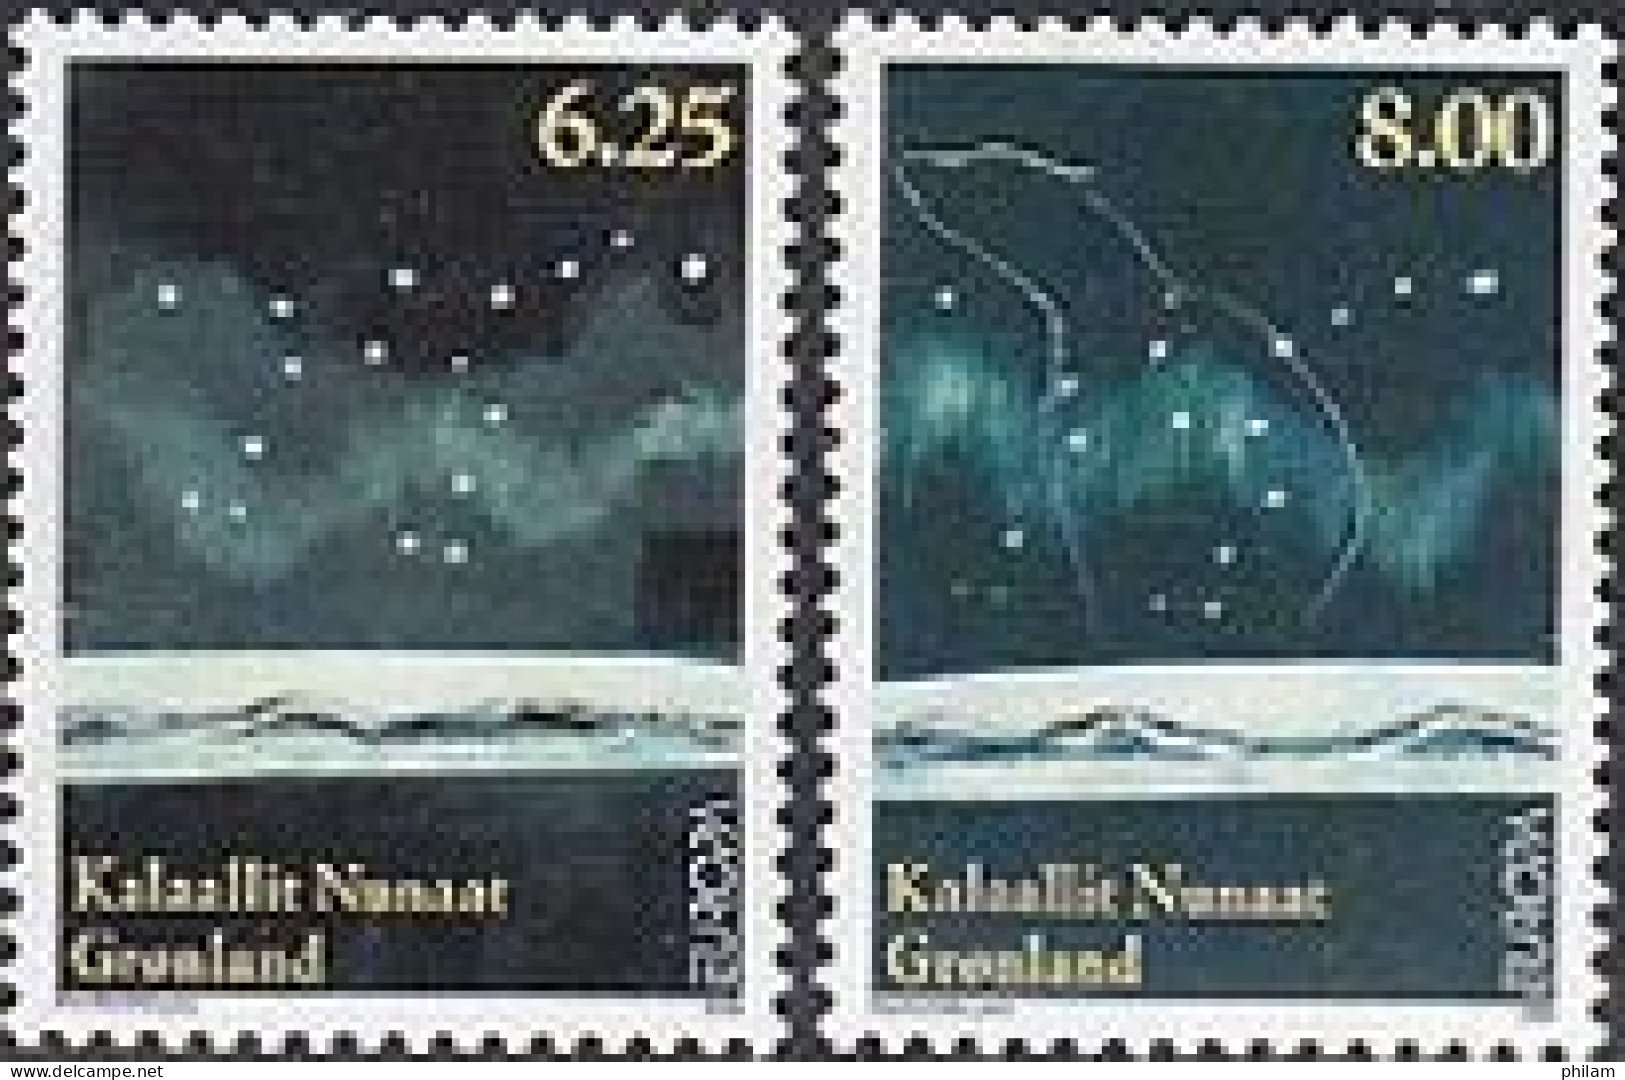 GROENLAND 2009 - Europa - L'astronomie -  Gommés - 2 V. - Unused Stamps